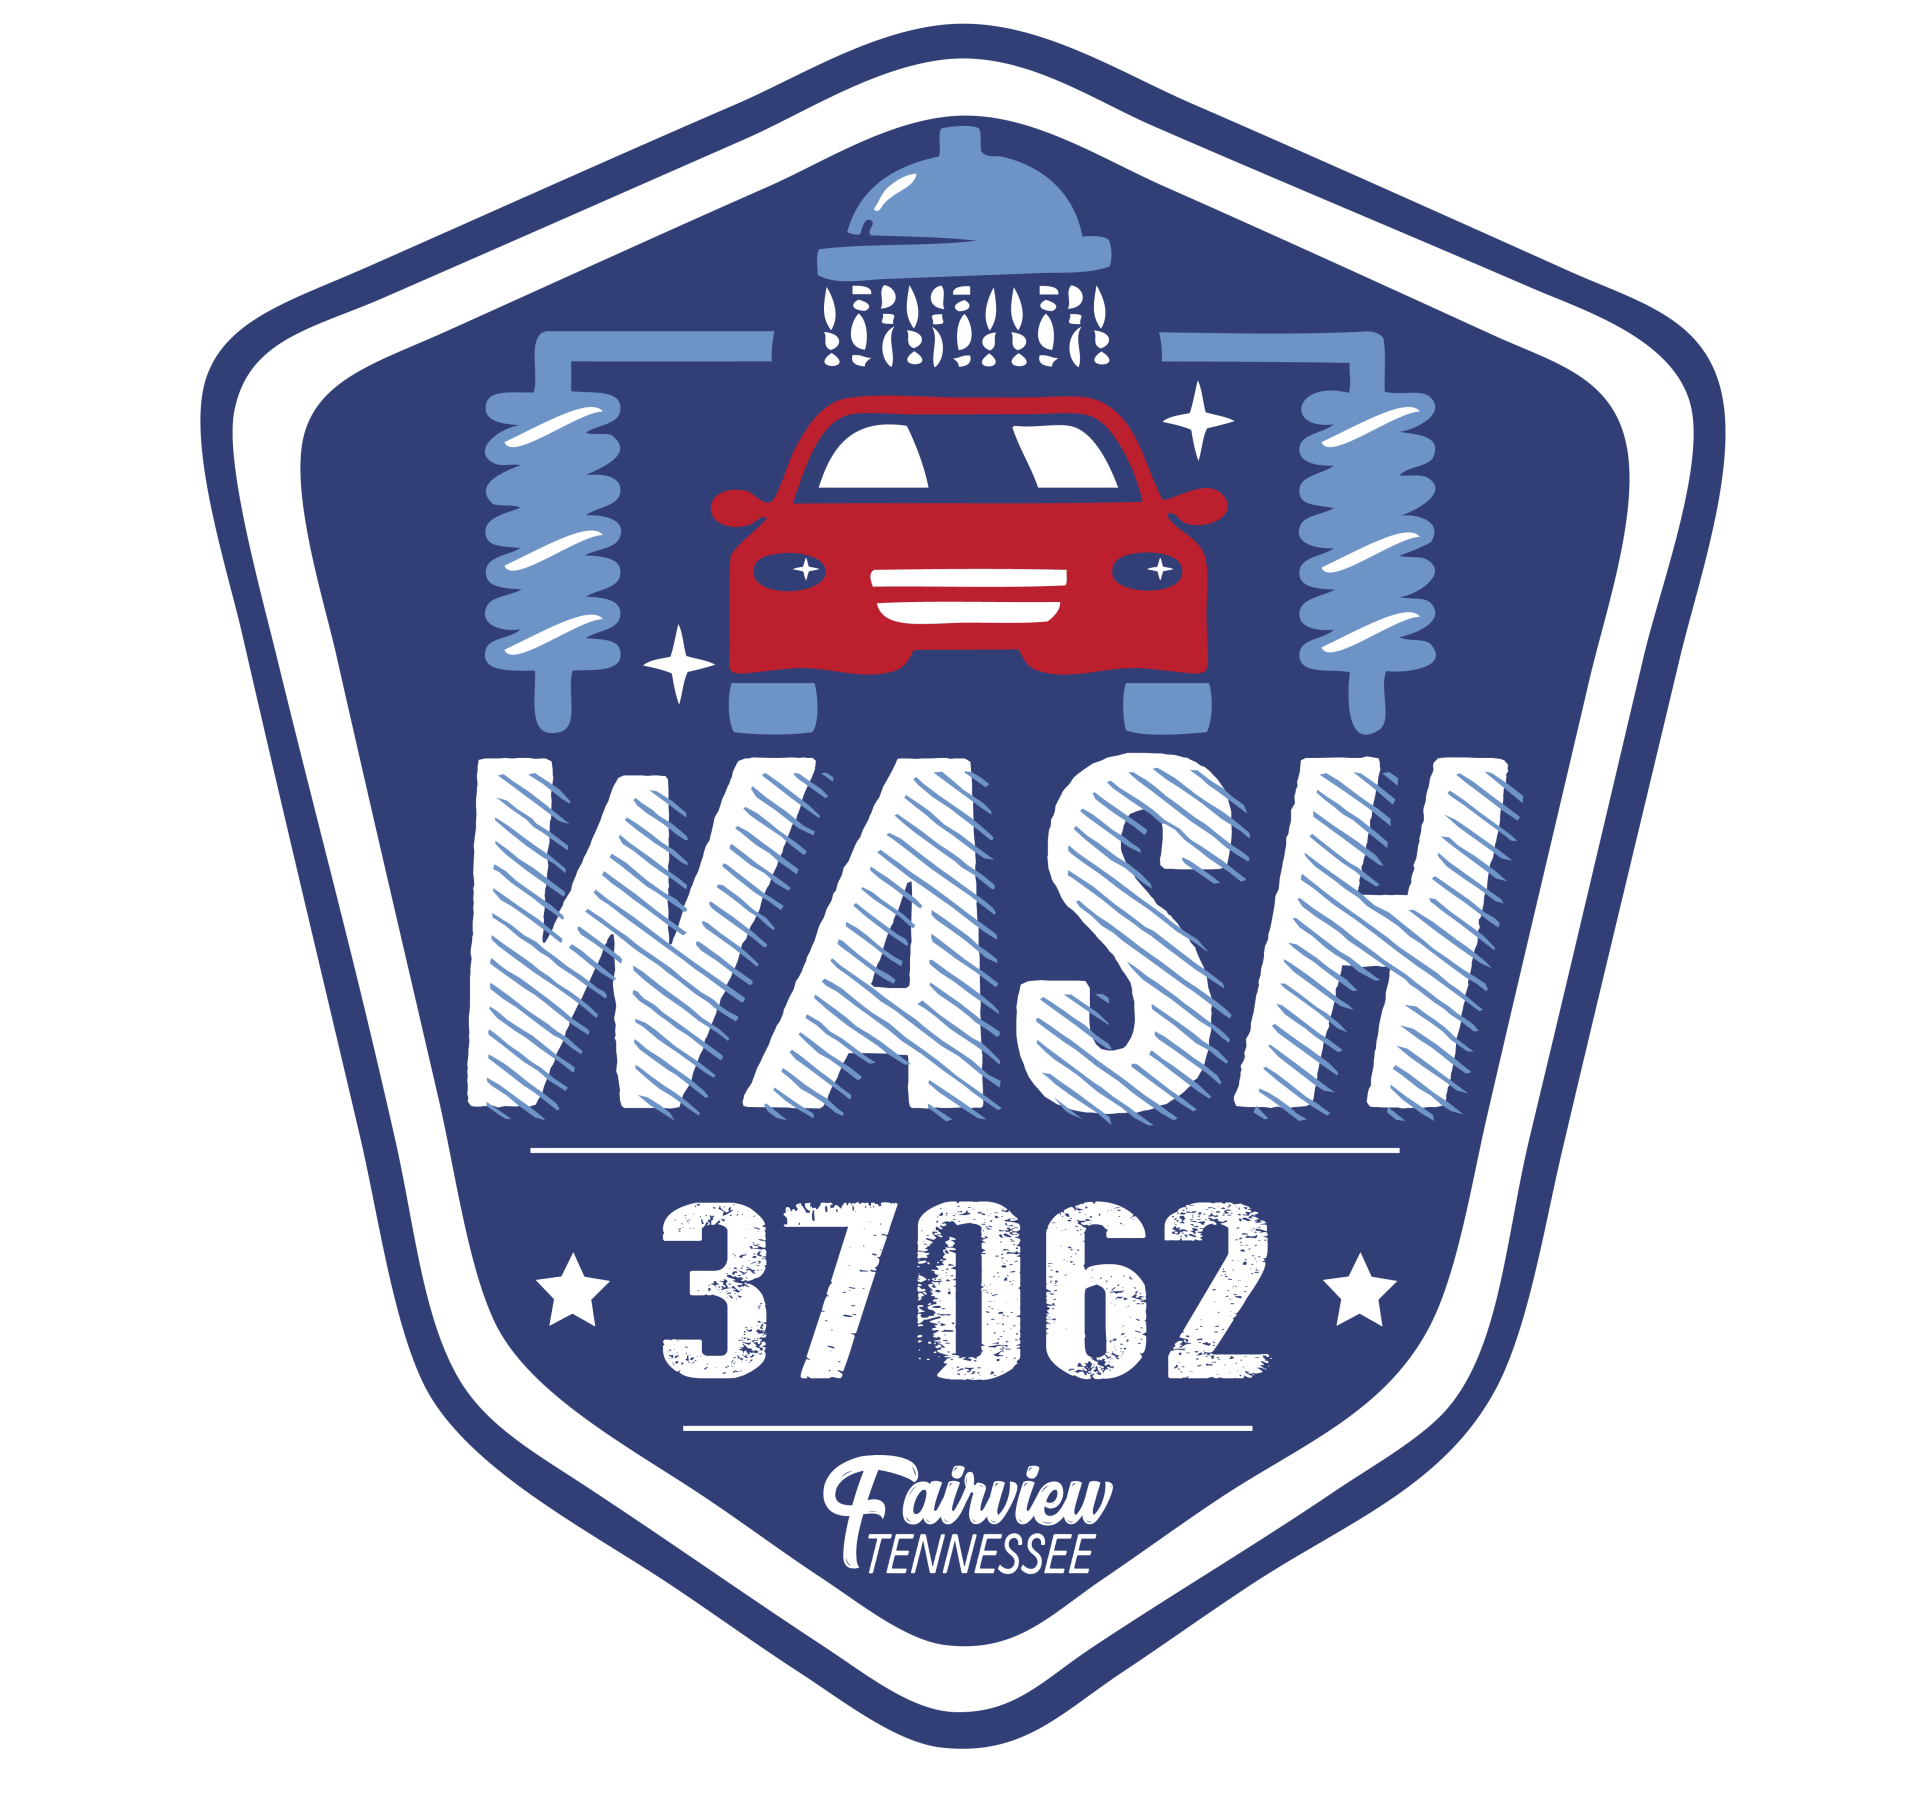 CAR WASH 37062 IN fARIVIEW tENNESSEE